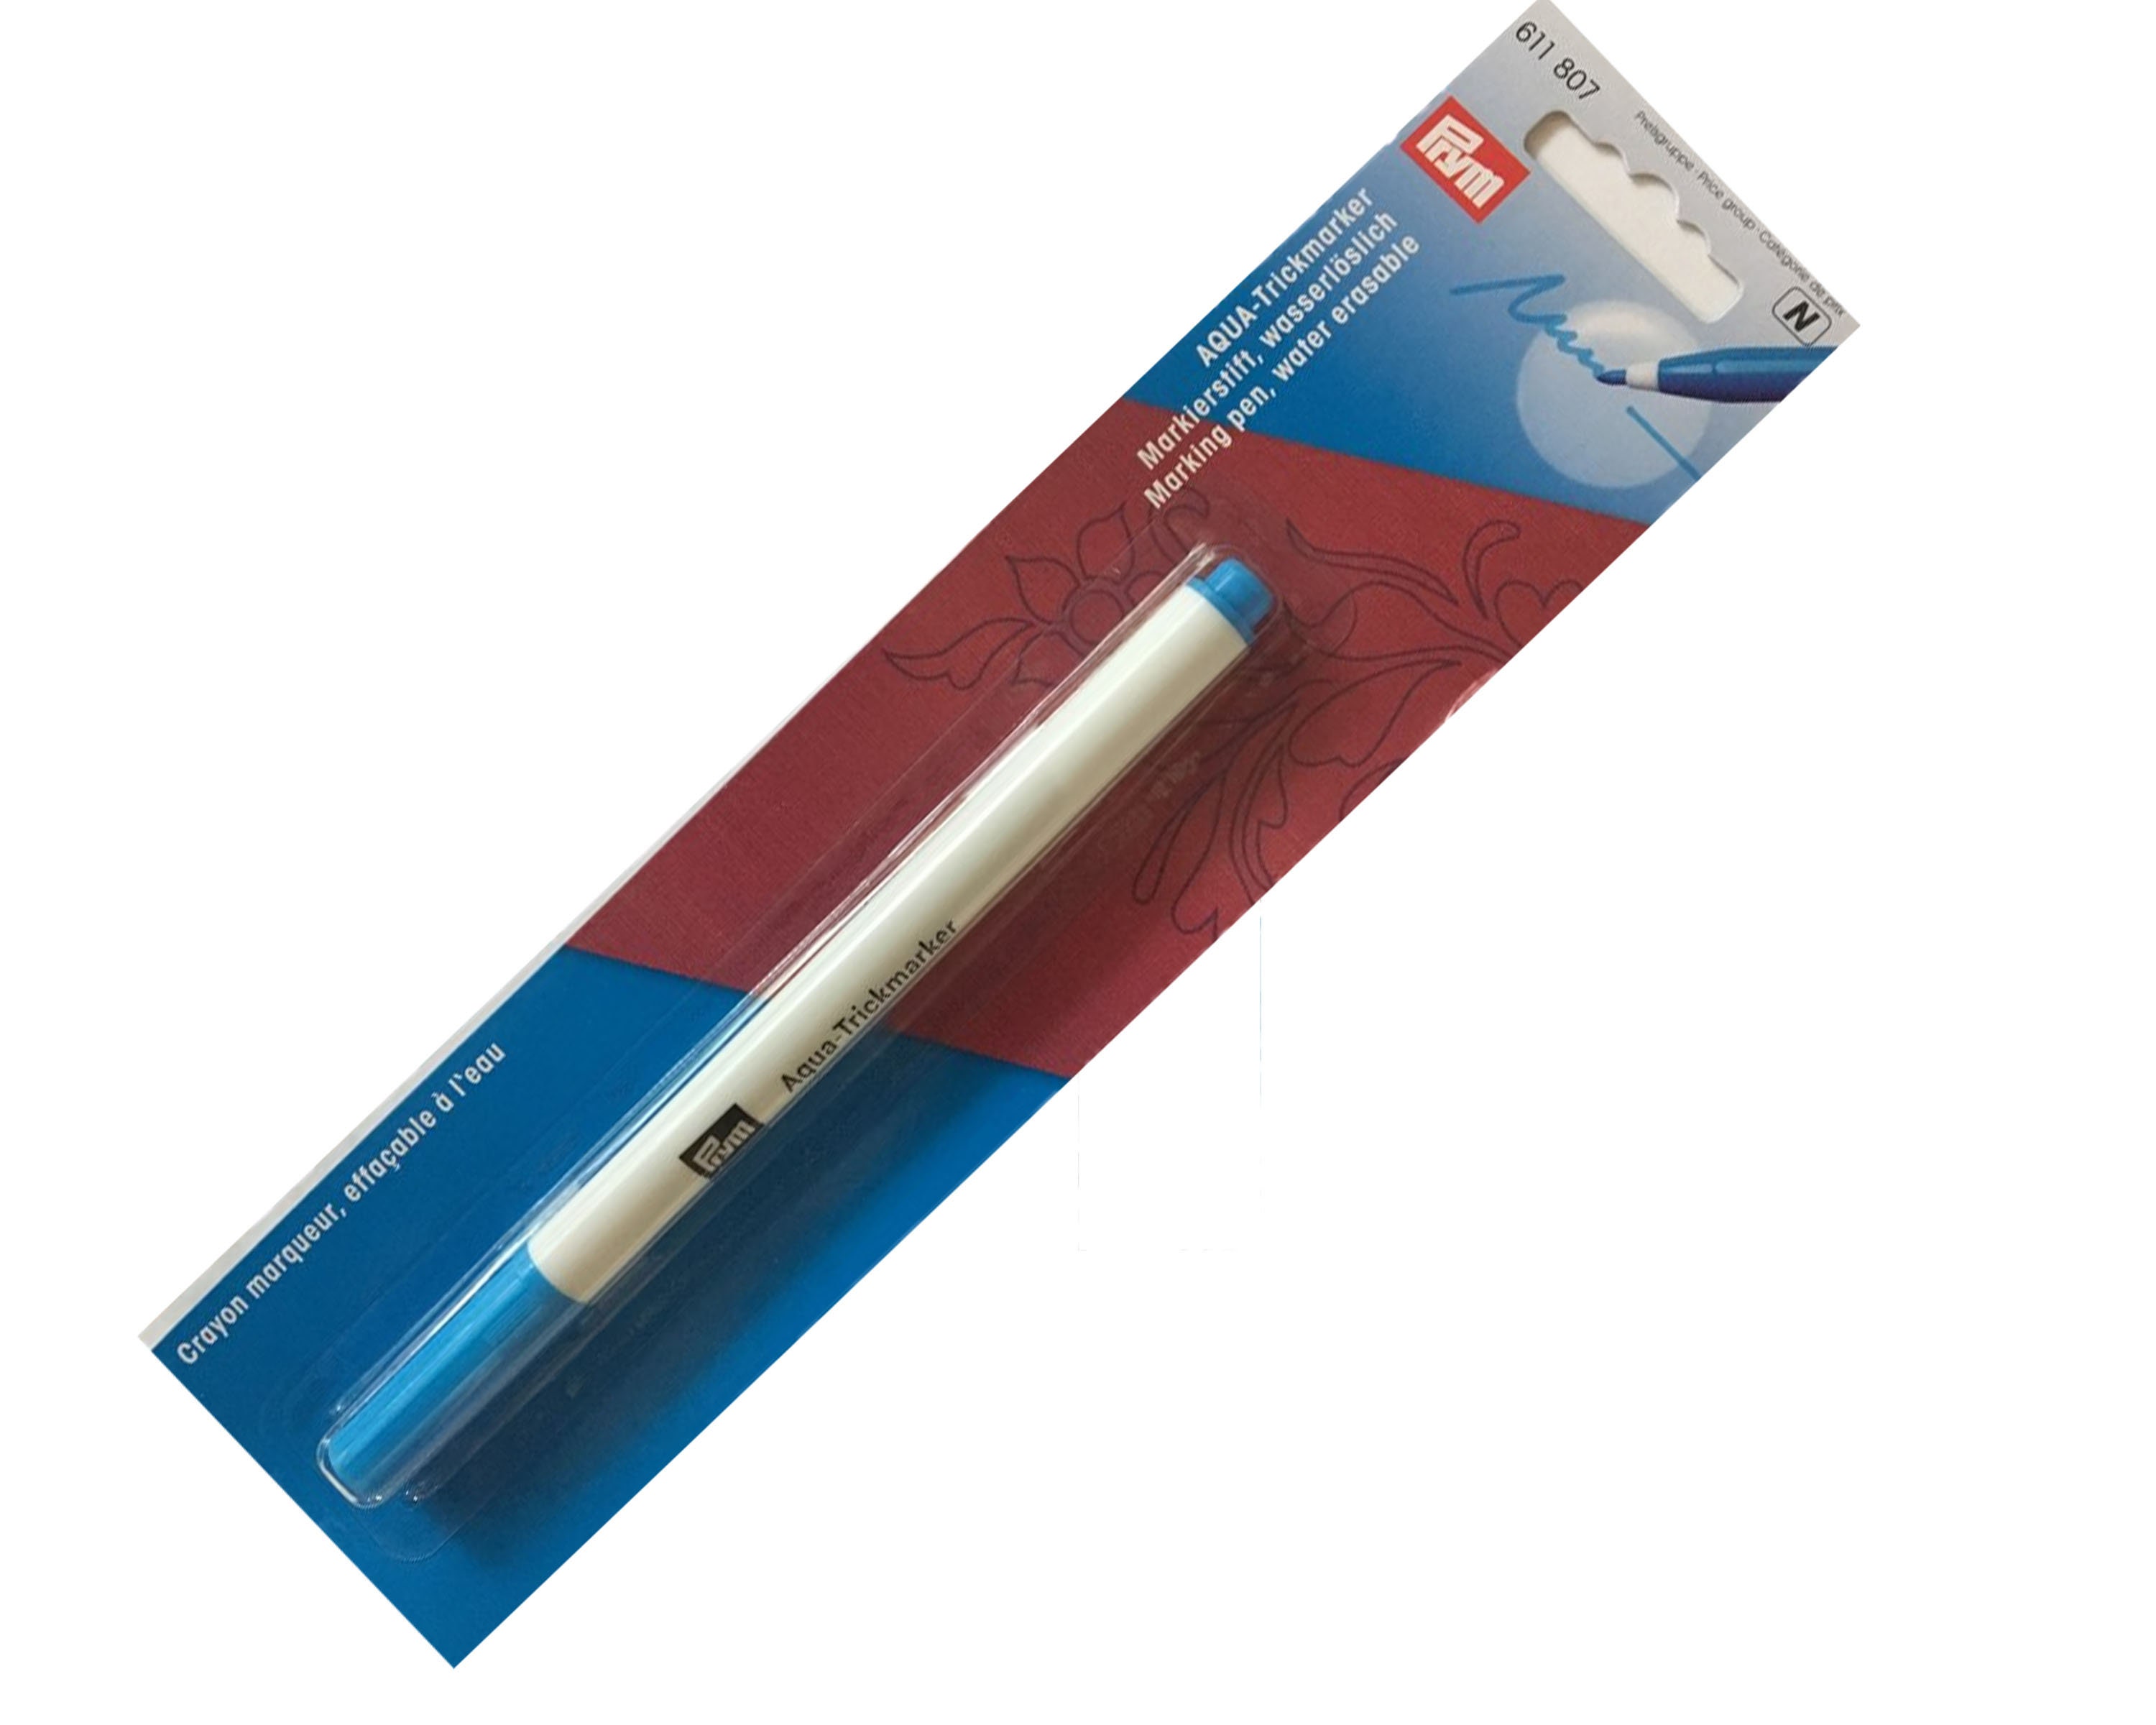 Prym Aqua Trickmarker, Water Soluble Pen, Sewing Accessory for Dressmaker  or Quilter, Washable Marking Tool 611807 